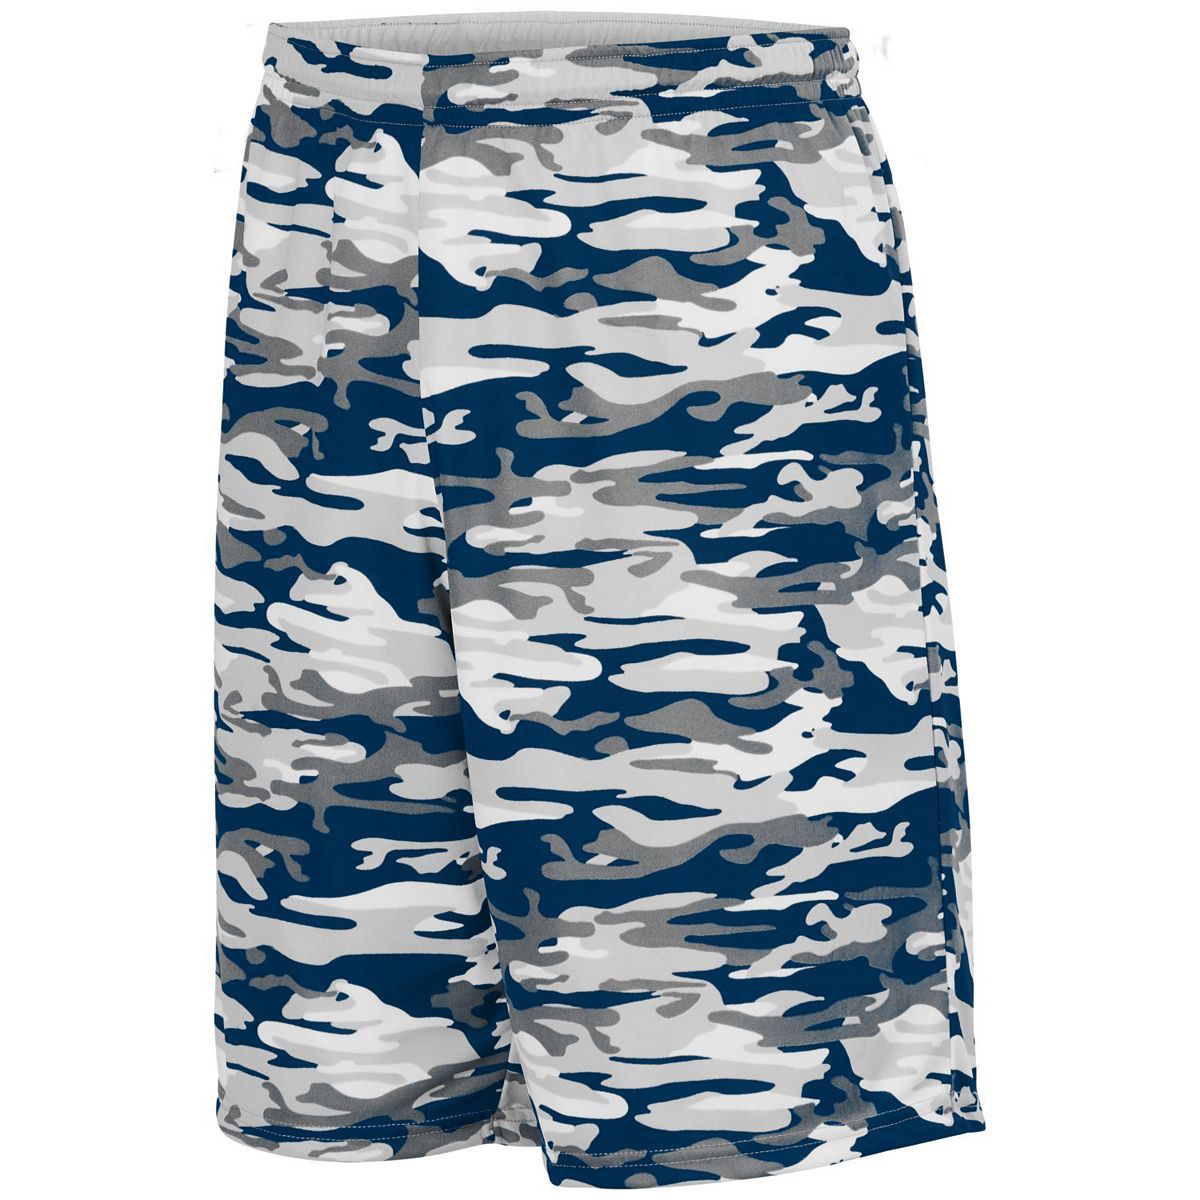 Augusta Sportswear Youth Reversible Wicking Shorts in Navy Mod/White  -Part of the Youth, Youth-Shorts, Augusta-Products, Basketball, All-Sports, All-Sports-1 product lines at KanaleyCreations.com